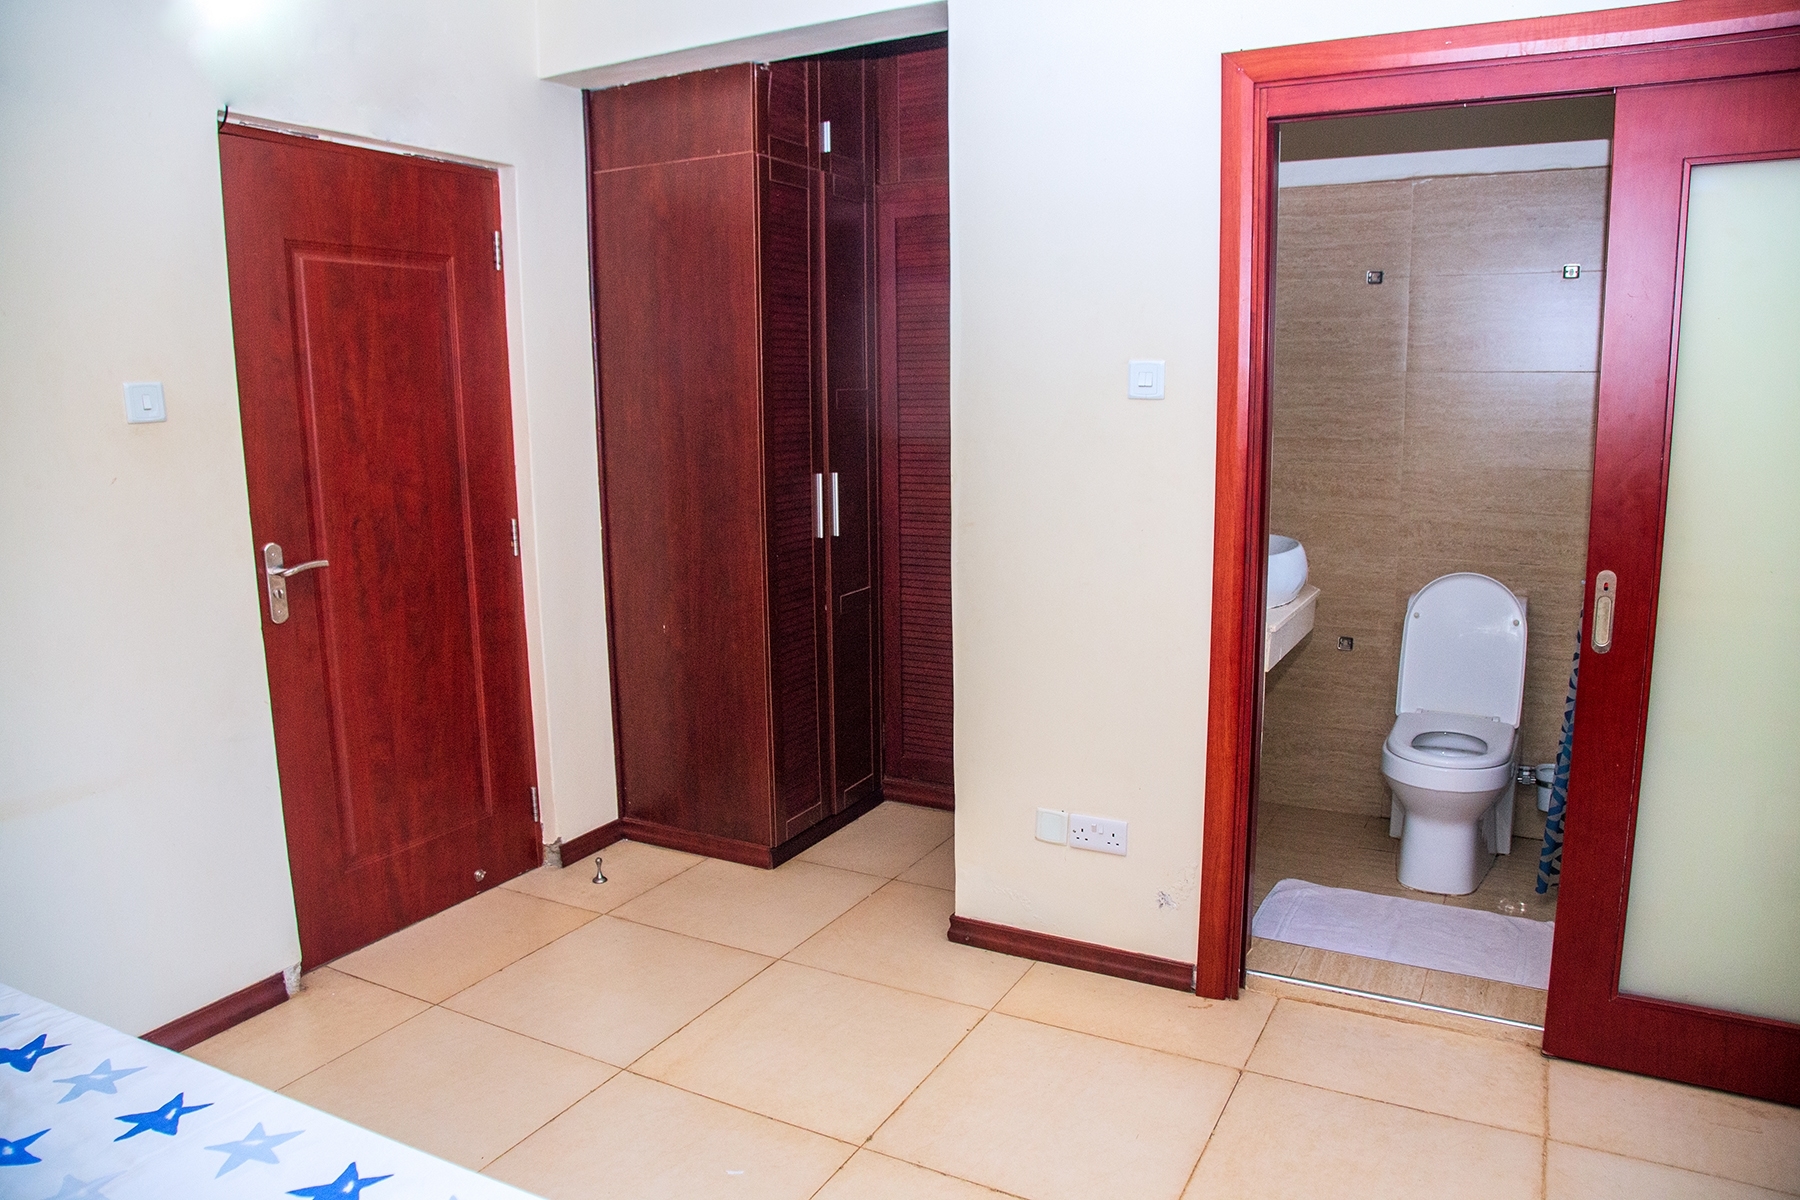 Apartment for sale in Portbell Kampala